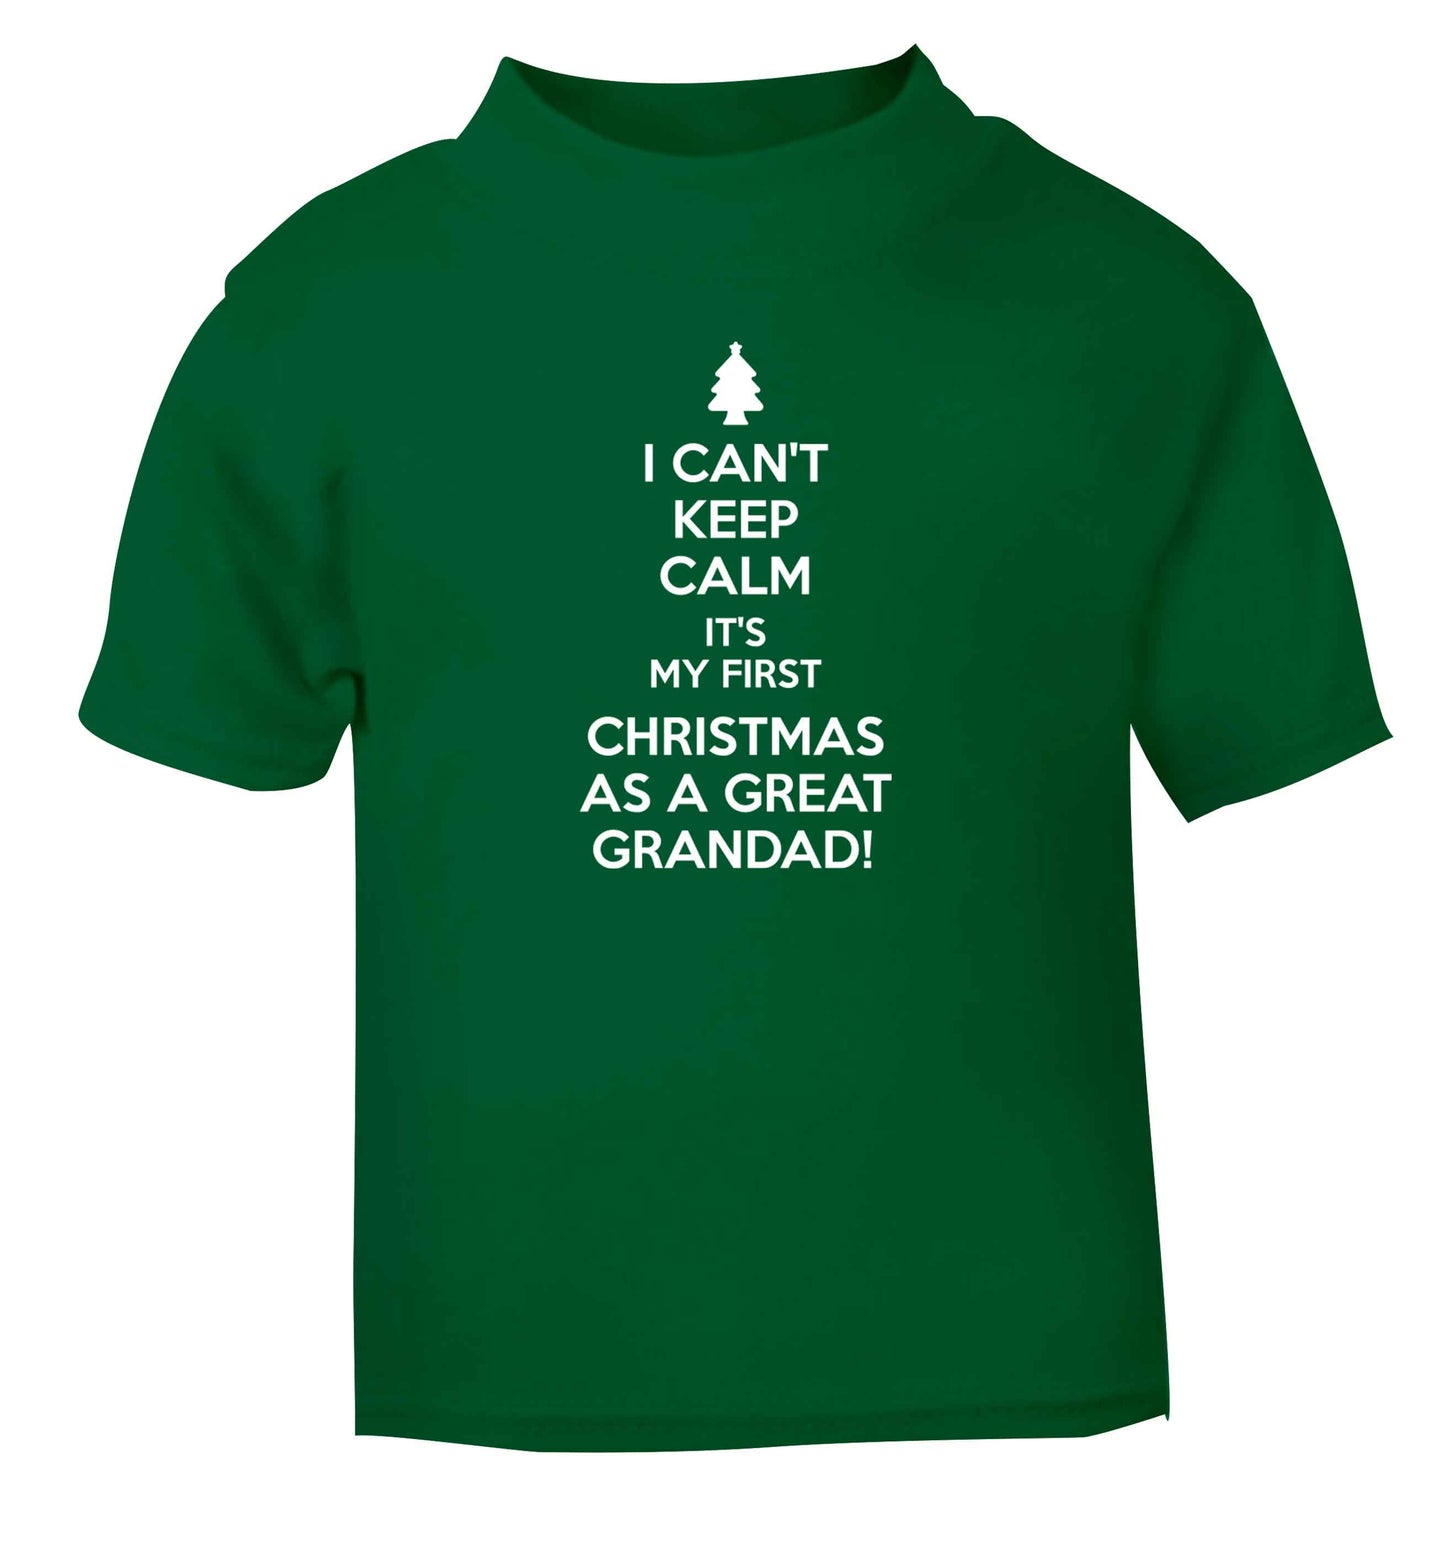 I can't keep calm it's my first Christmas as a great grandad! green Baby Toddler Tshirt 2 Years